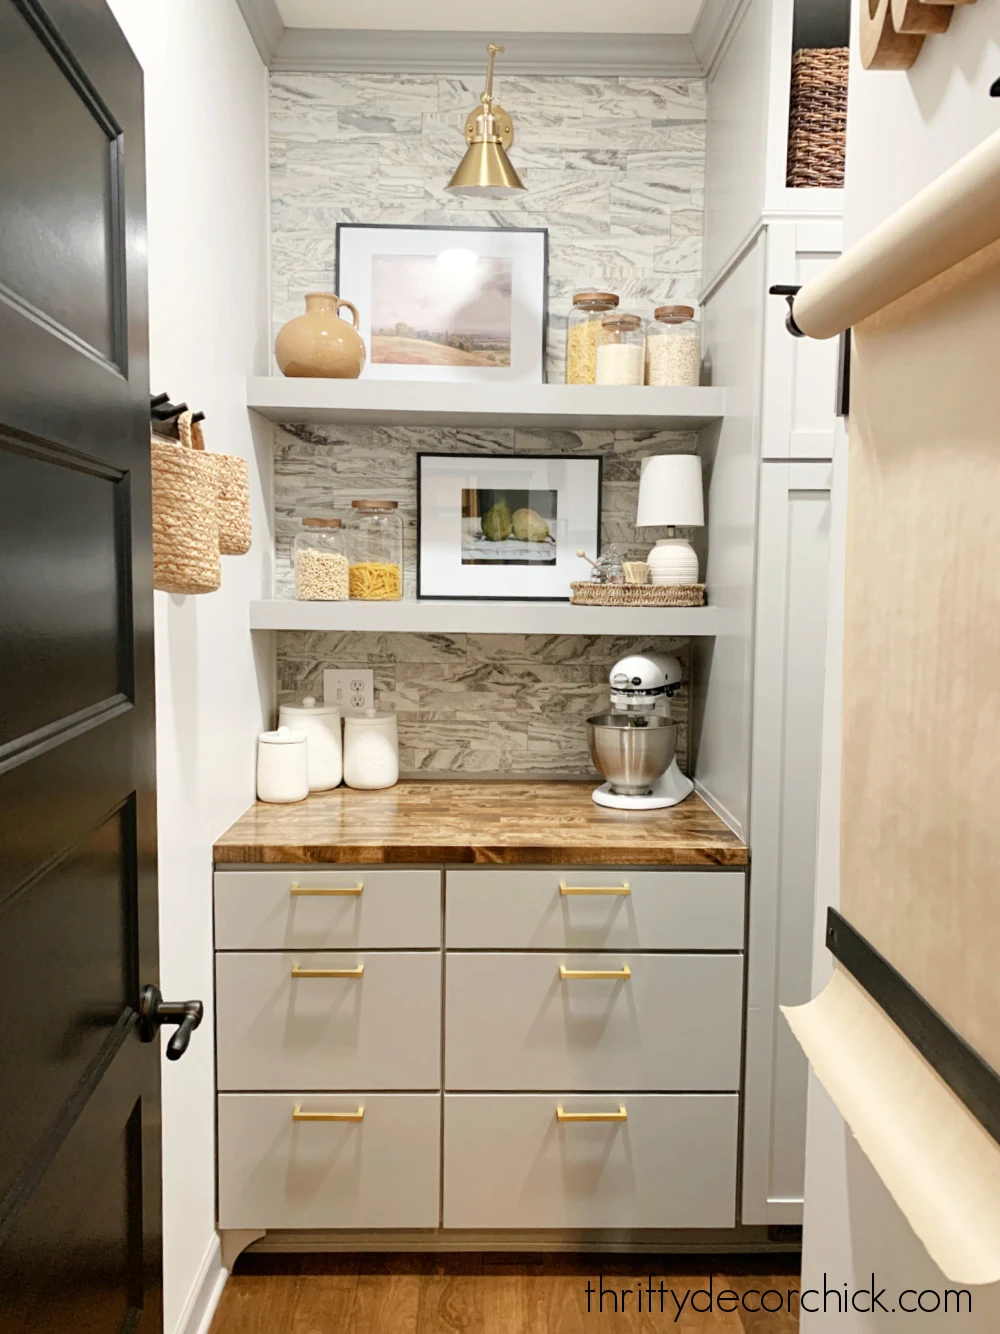 pantry with kitchen cabinets